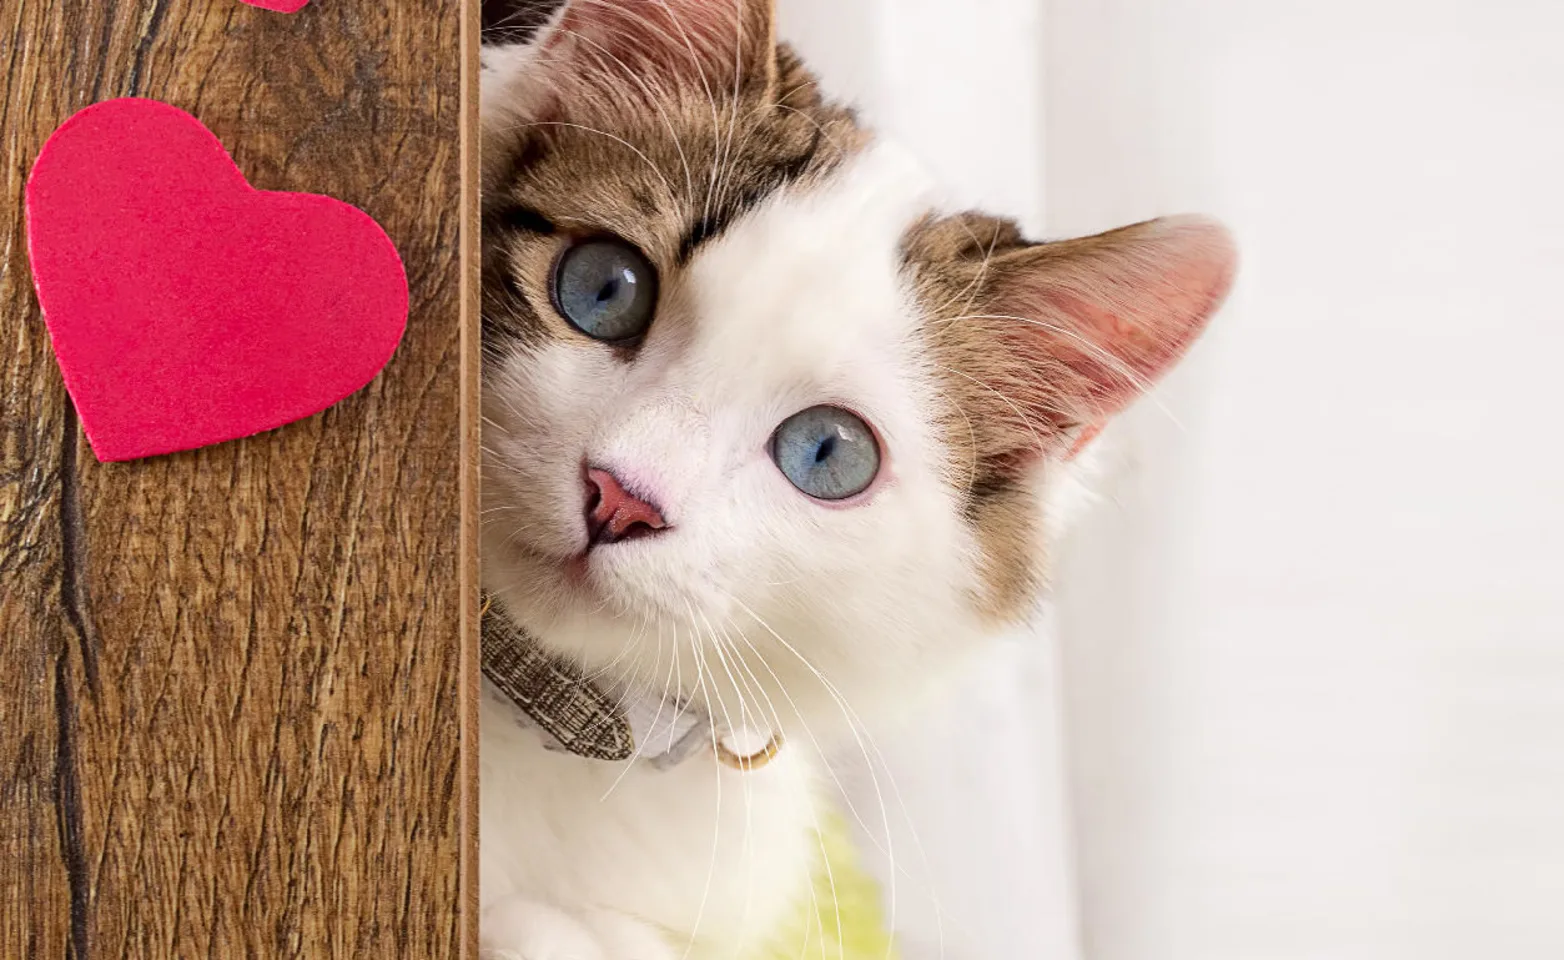 A kitten poking around a corner that has paper hearts glued to it